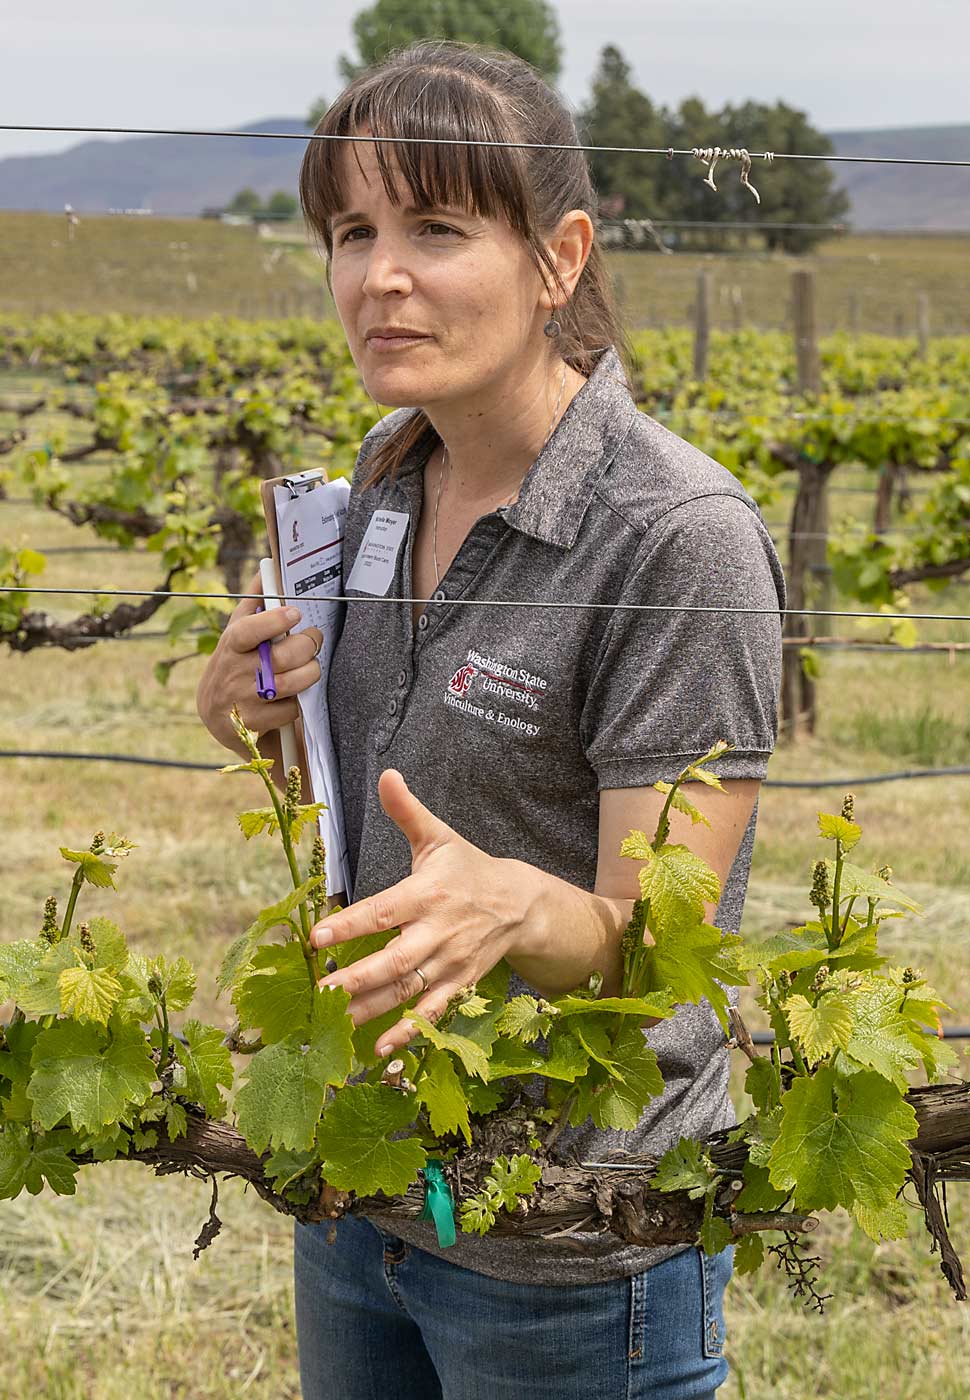 WSU viticulturist Michelle Moyer said crop load estimation will pose a challenge in 2022, as vines experienced unprecedented heat in 2021 as well as cold damage and an unusually cool spring that slowed development. (Kate Prengaman/Good Fruit Grower)